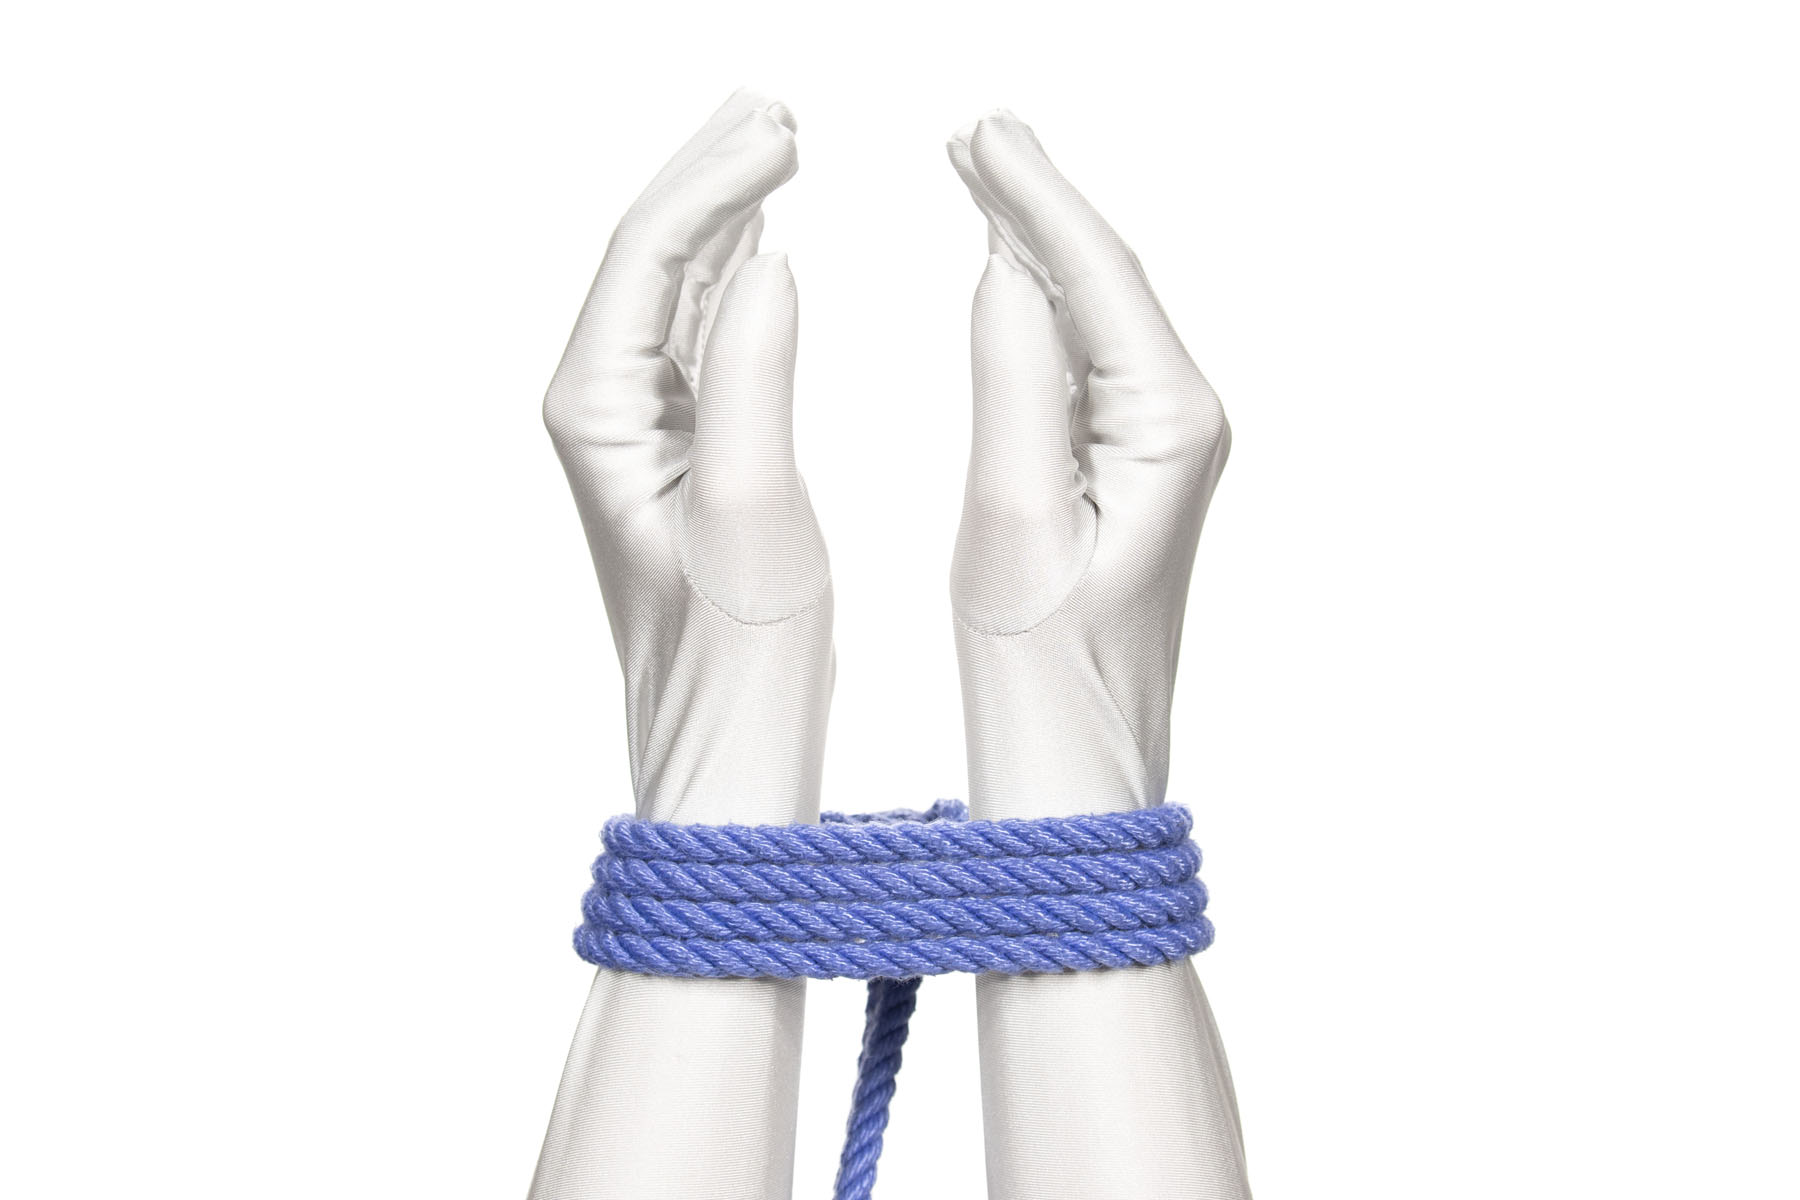 Two hands are tied together by a single column tie at the wrists. Two double wraps go around the wrists and the knot is barely visible on the far side. The wrists have a three inch gap between them.